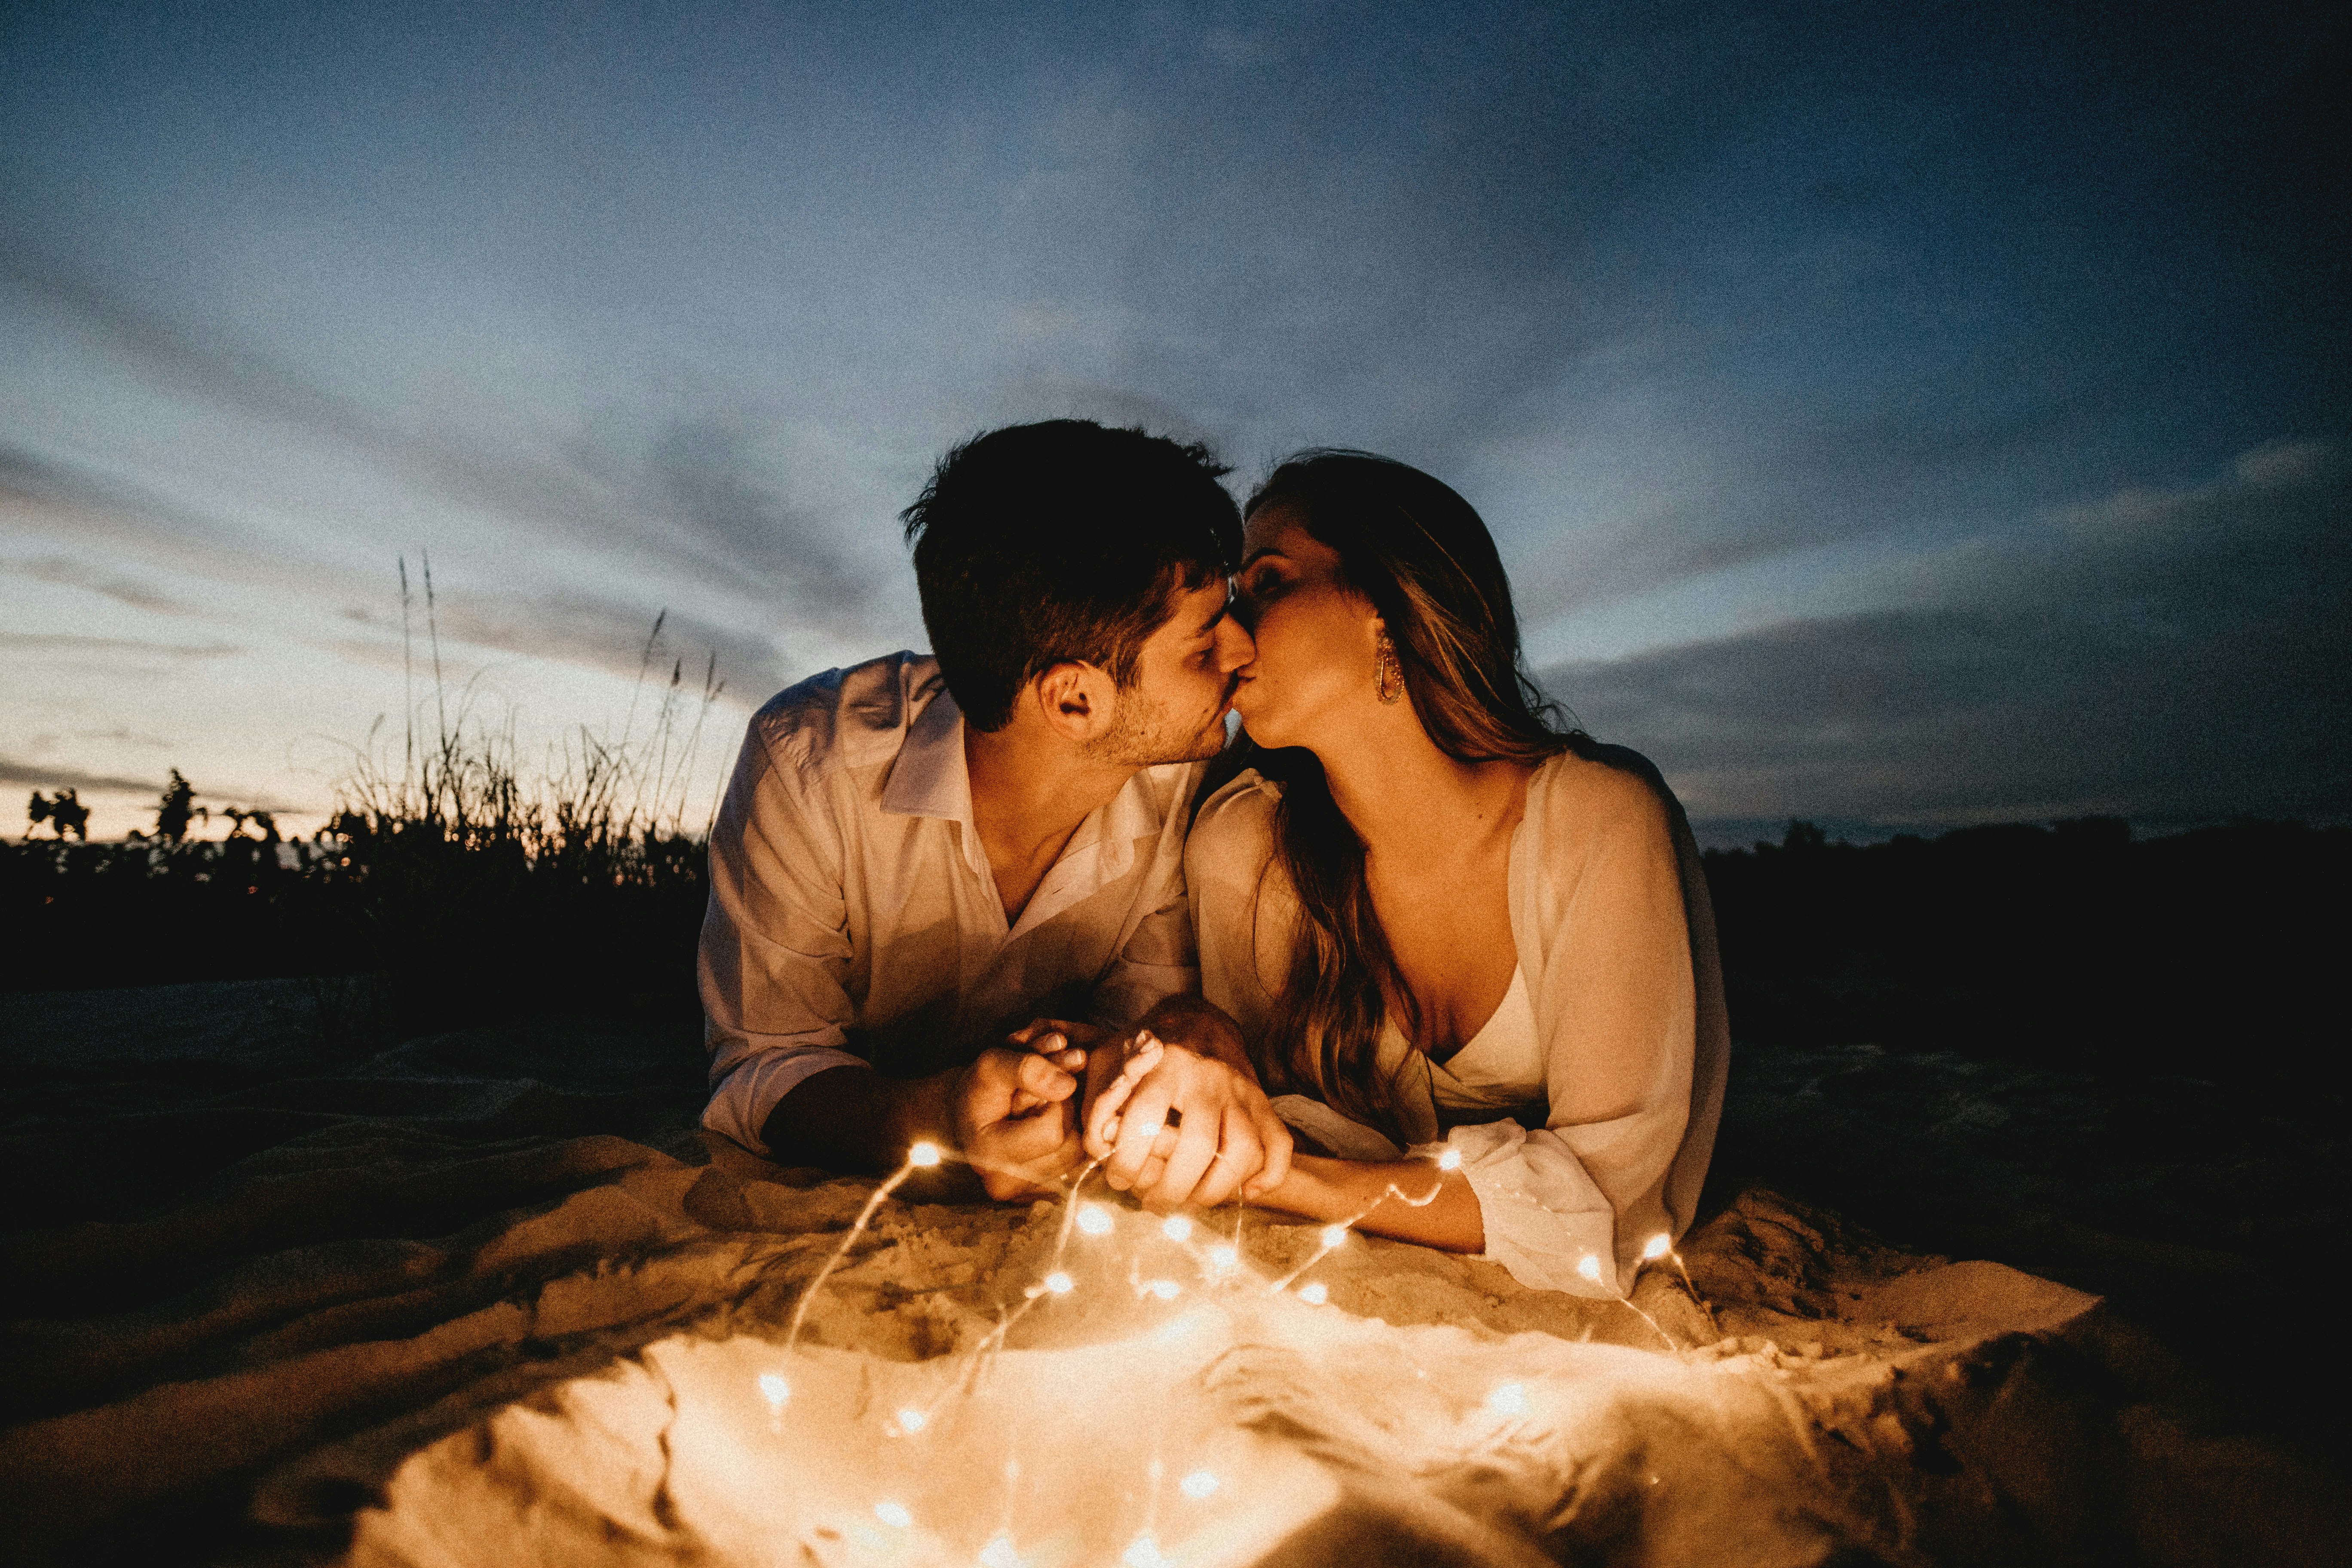 man and woman kissing on brown sand during night time